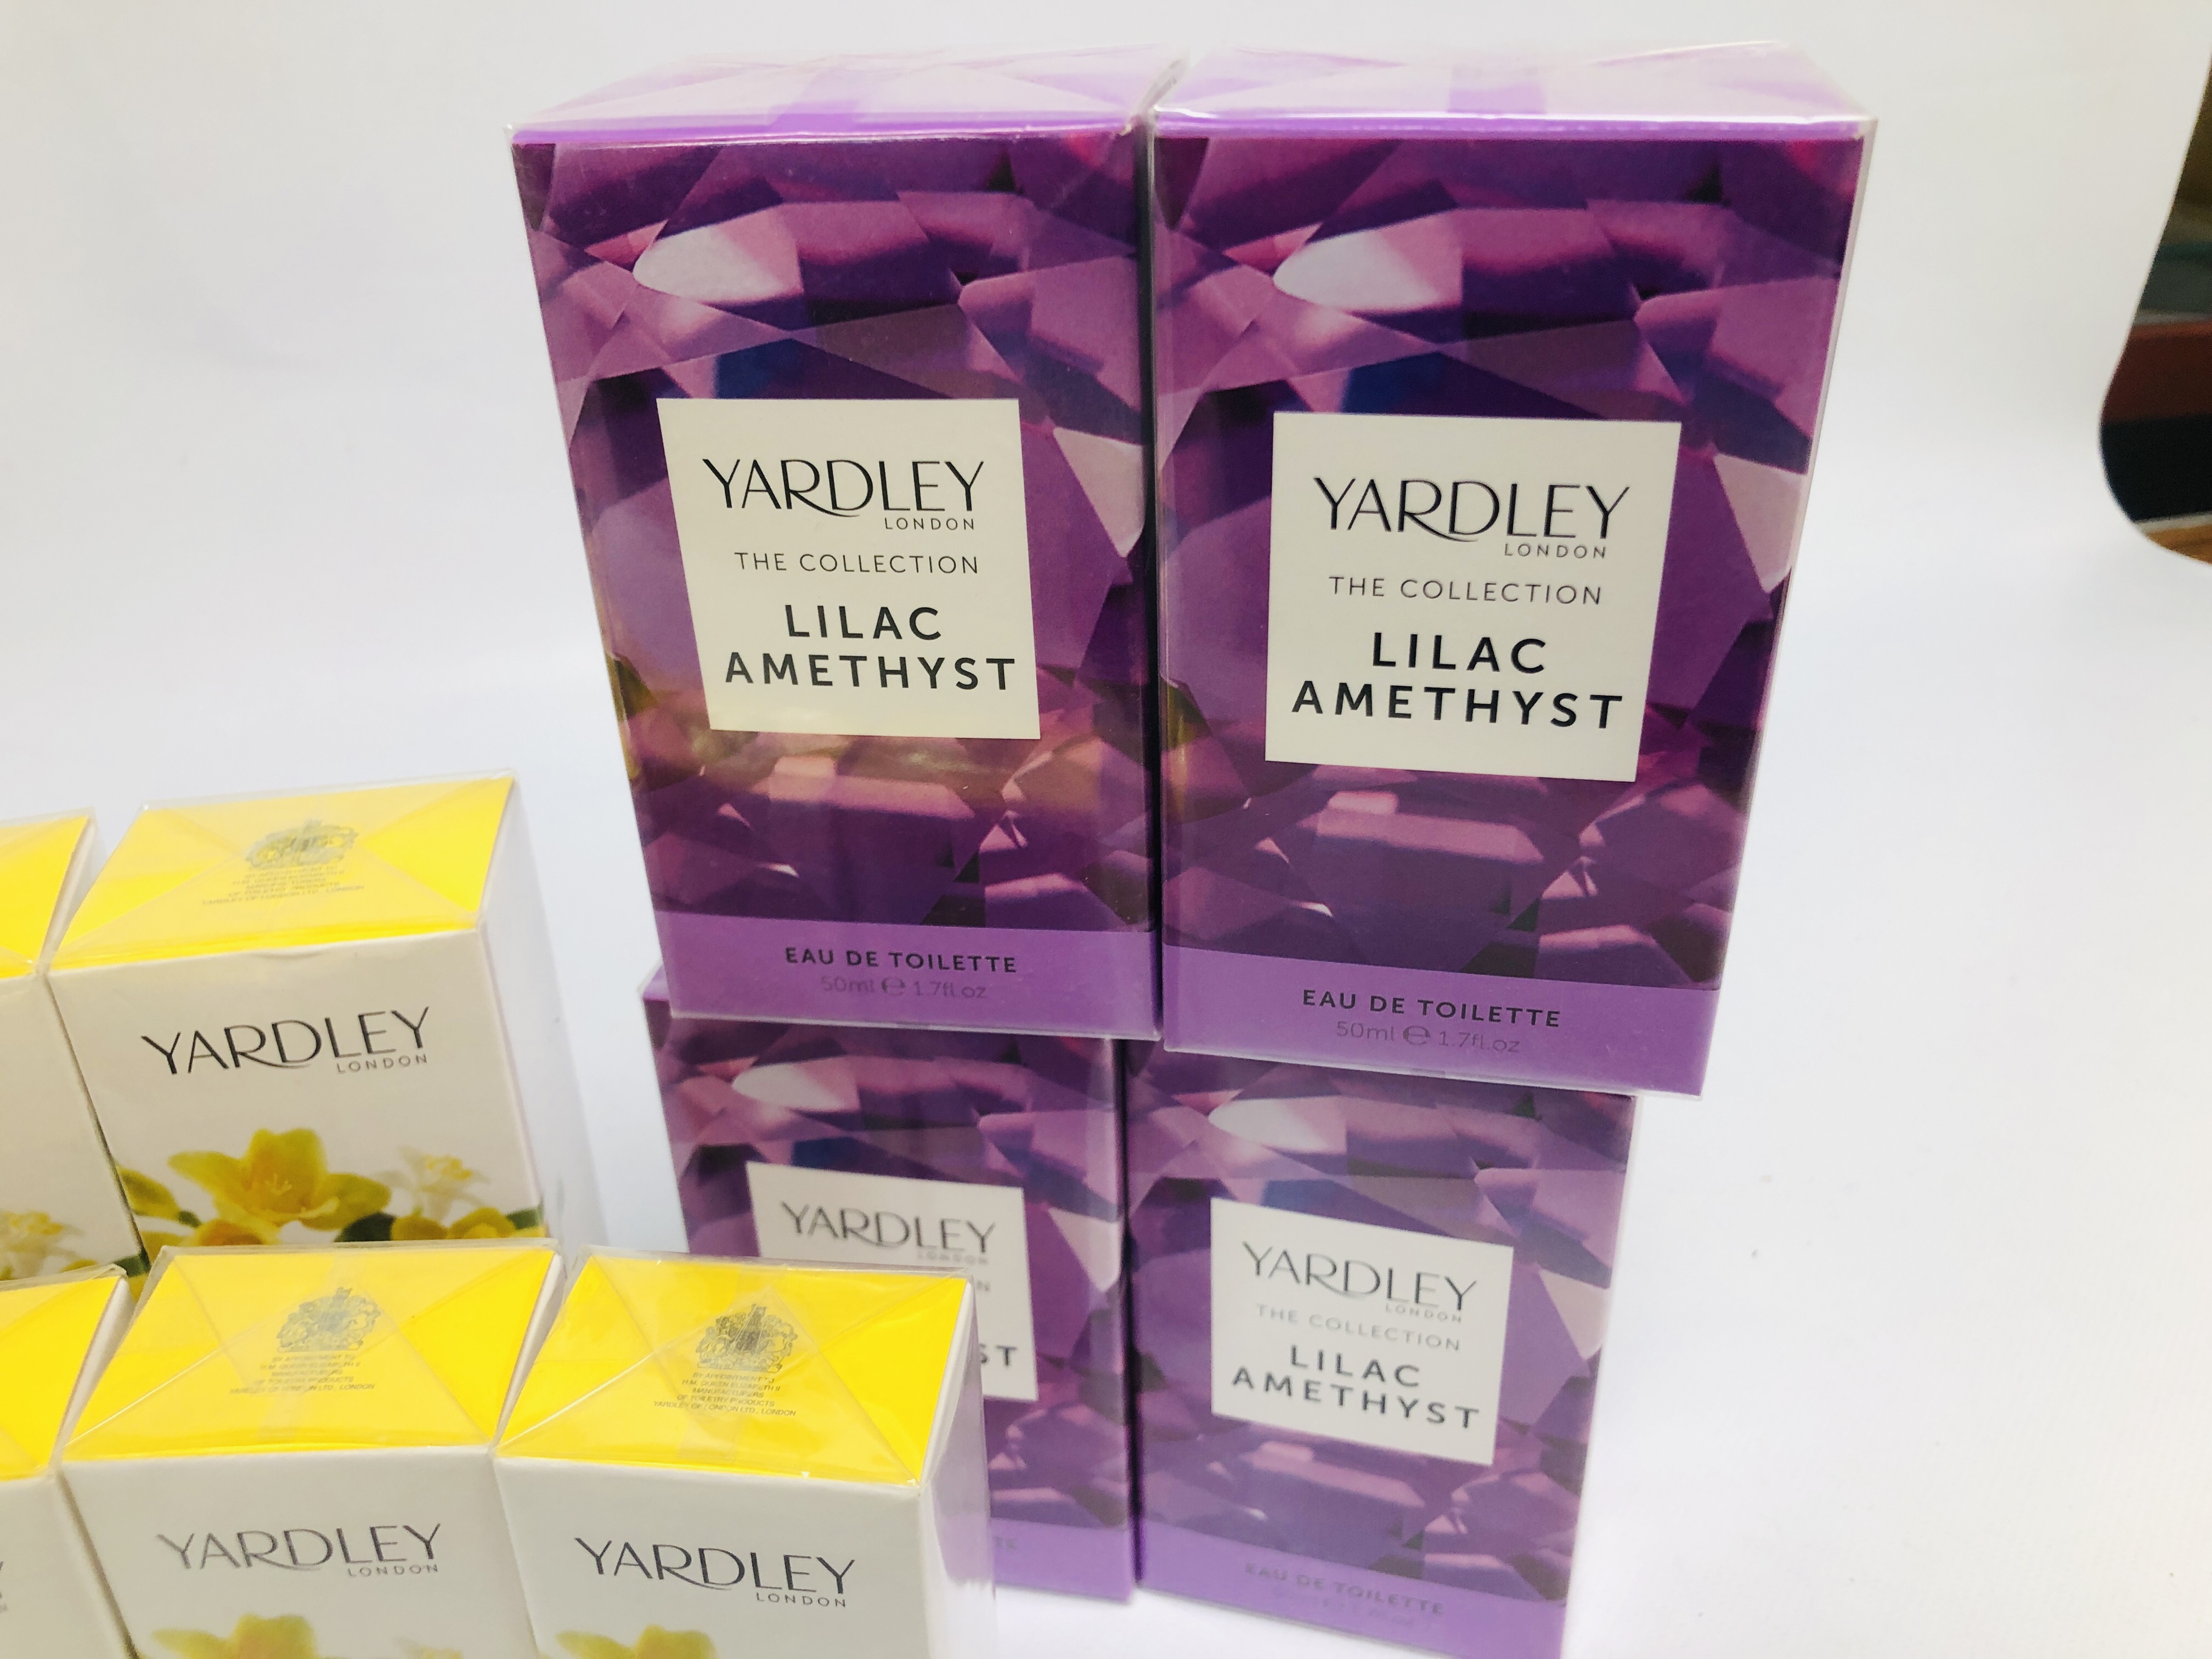 4 X BOTTLES OF YARDLEY THE COLLECTION "ROSIE RUBY" EAU DE TOILETTE 50ML (SEALED NEW IN ORIGINAL - Image 4 of 4